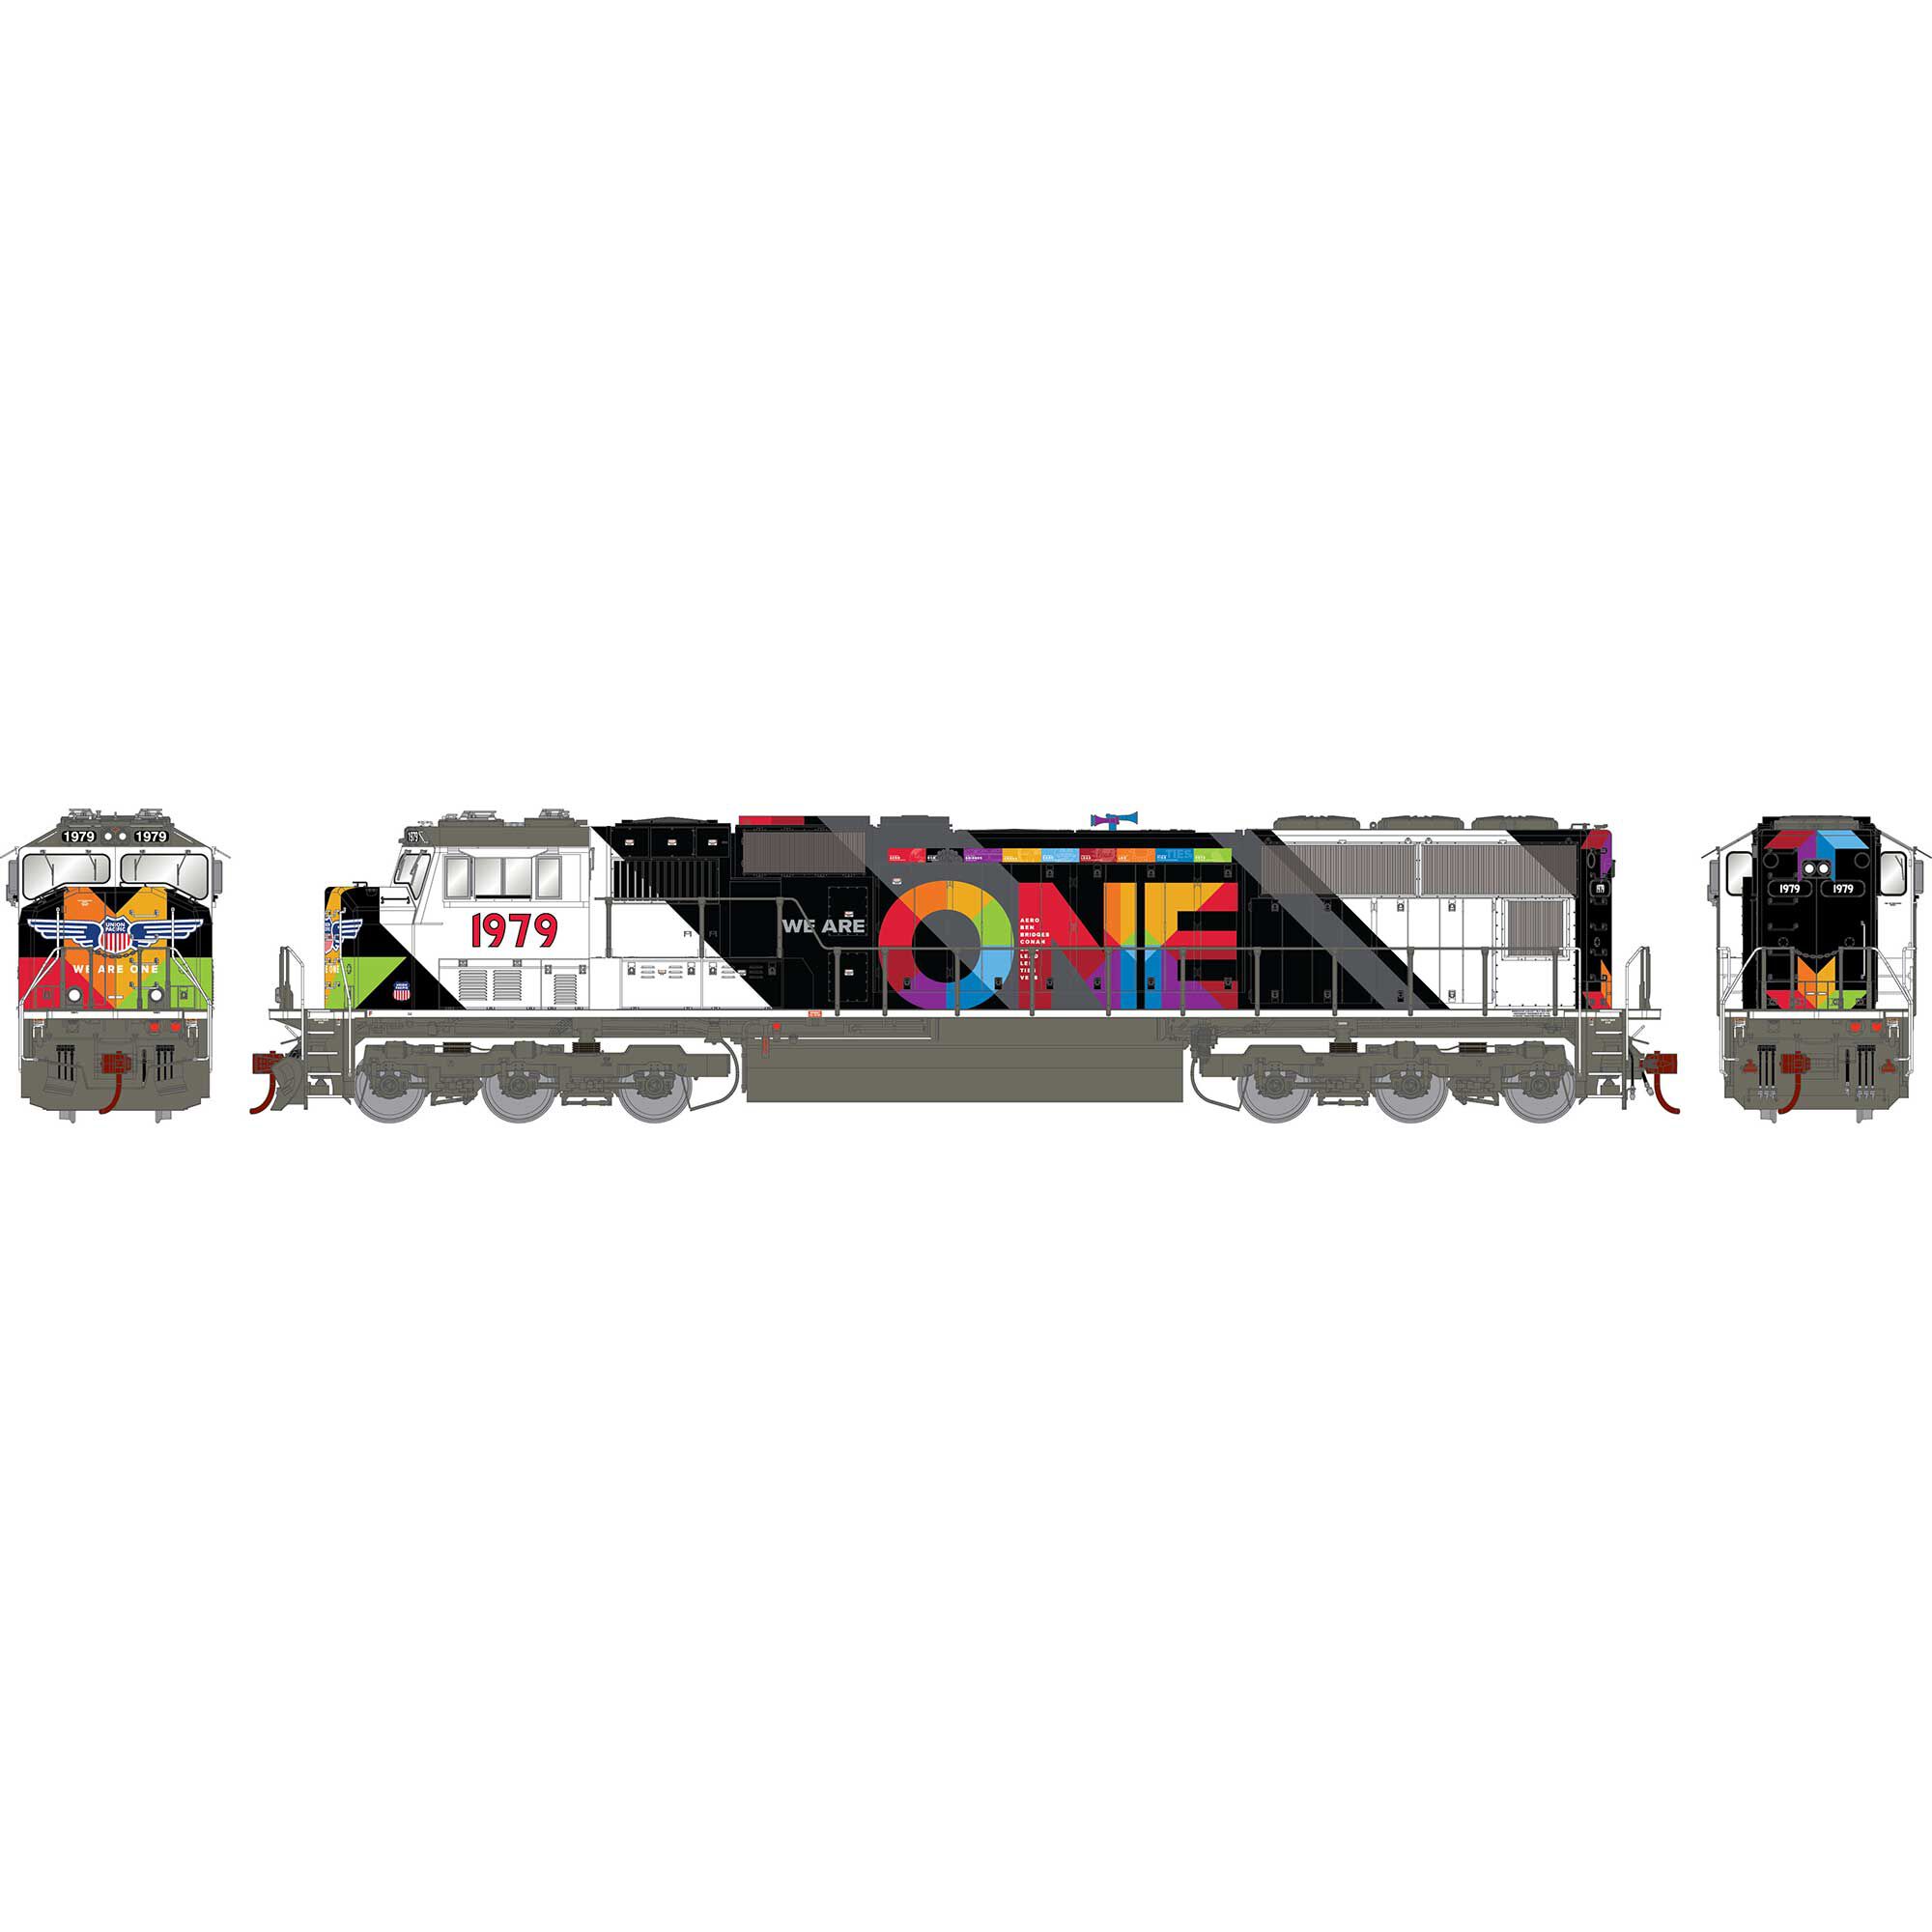 Athearn Genesis 75718   HO SD70M, Union Pacific/We are One #1979